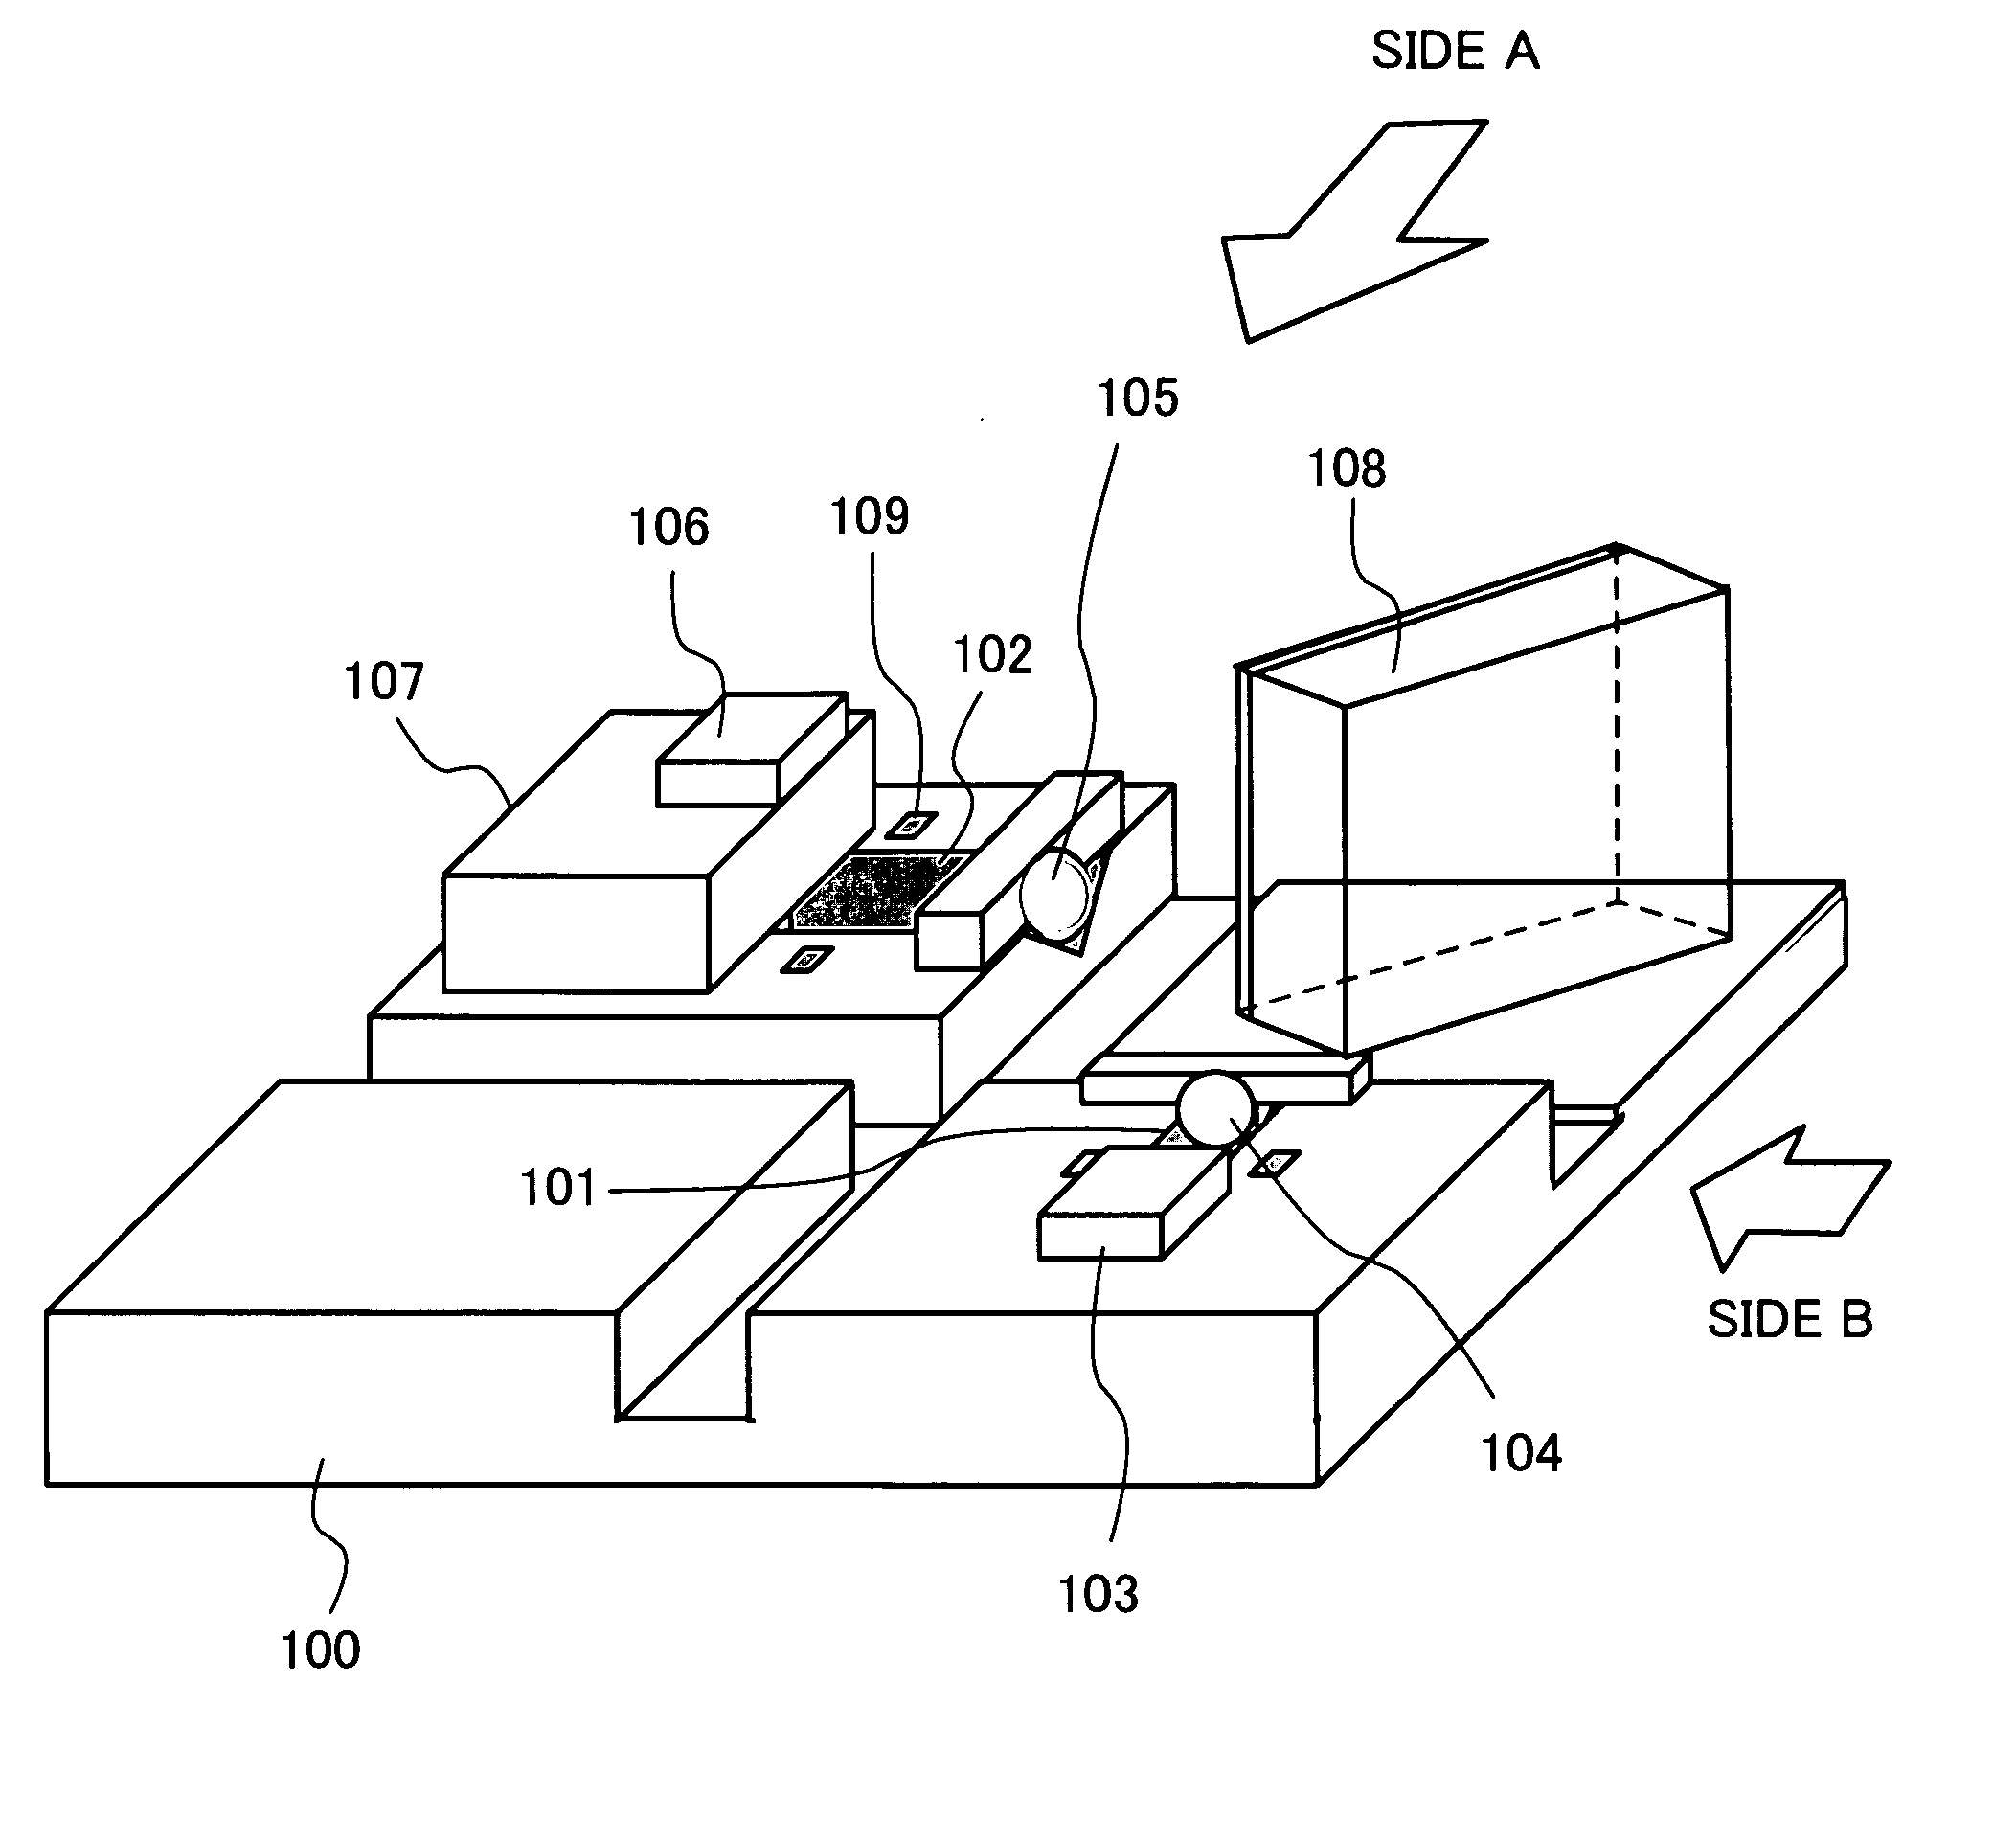 Micro-lens fabricated from semiconductor wafer